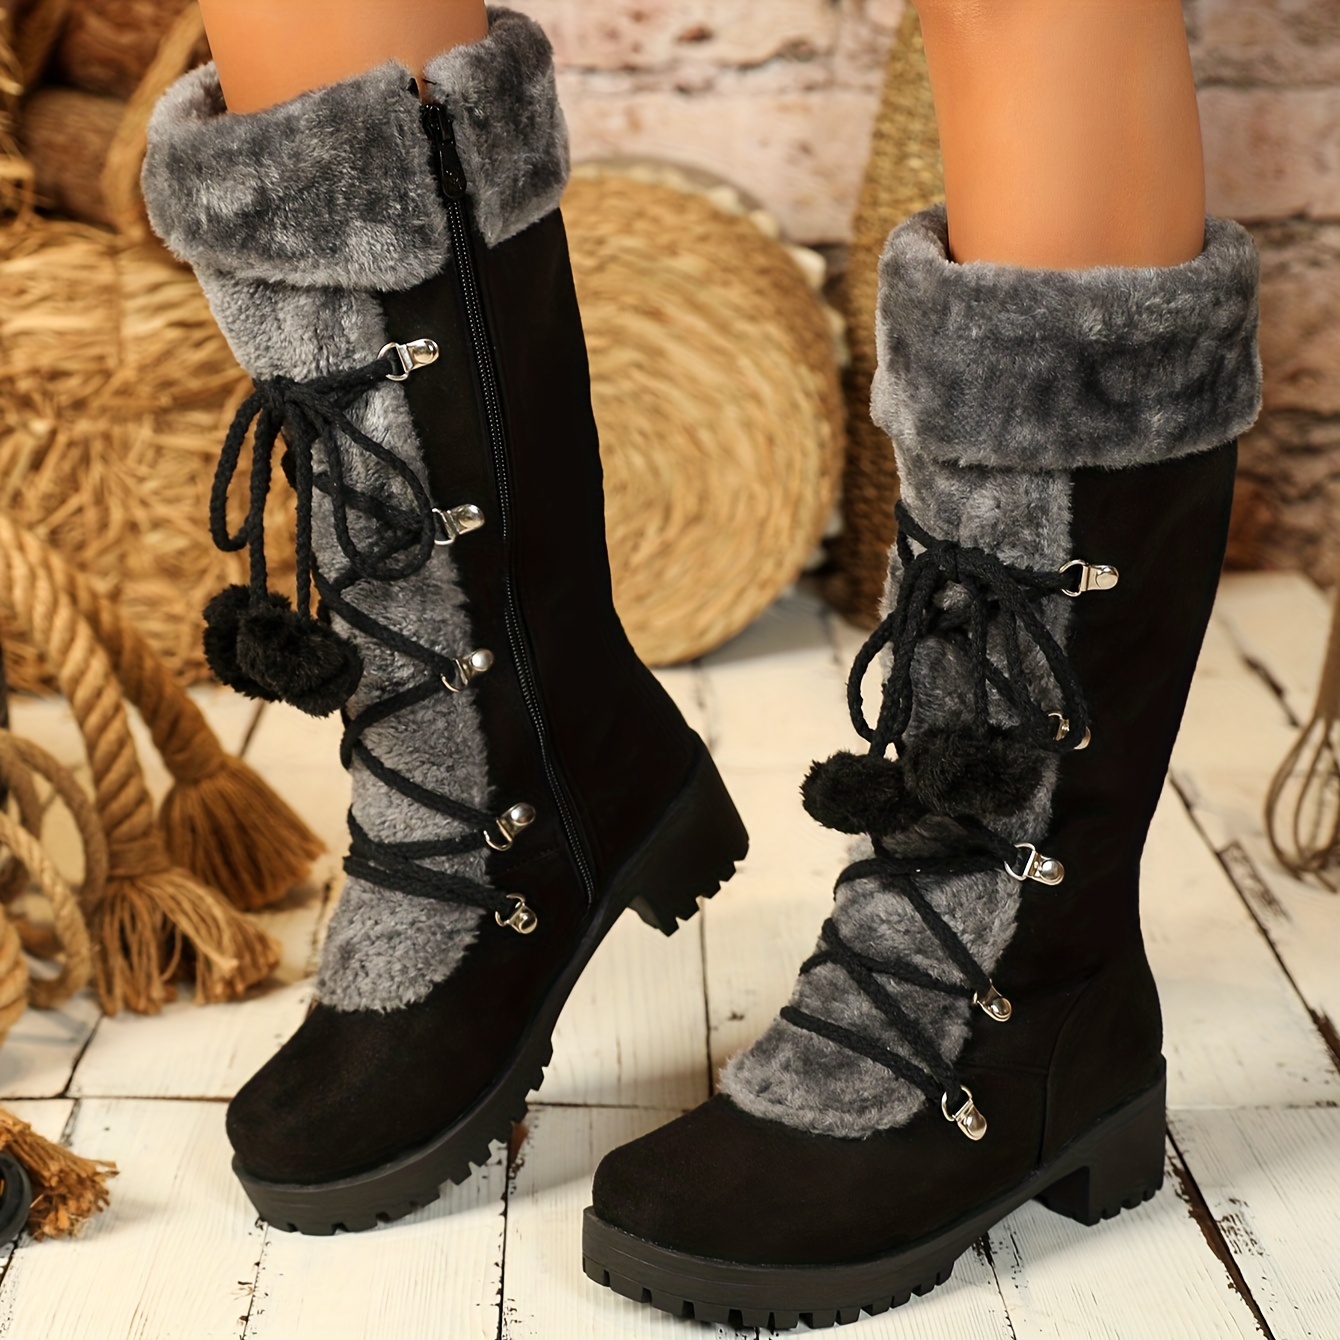 Women's Cute Fleece Snow Boots, Pom-pom Lace Up Chunky Heeled Mid Calf  Boots, Winter Warm Outdoor Boots